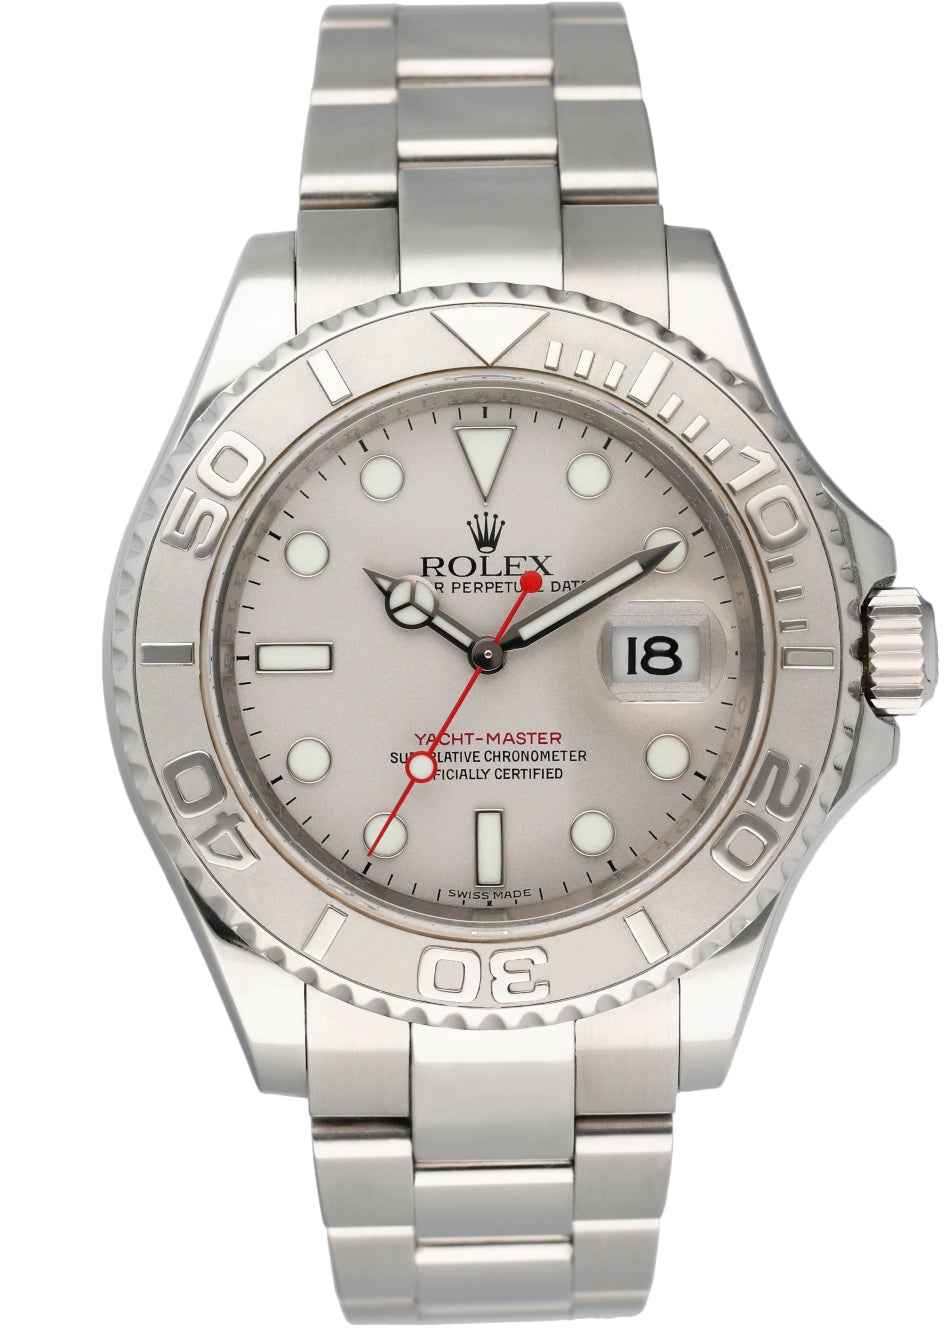 SOLD - Rolex Yachtmaster 16622 Circa 2008 Platinum Dial and Bezel